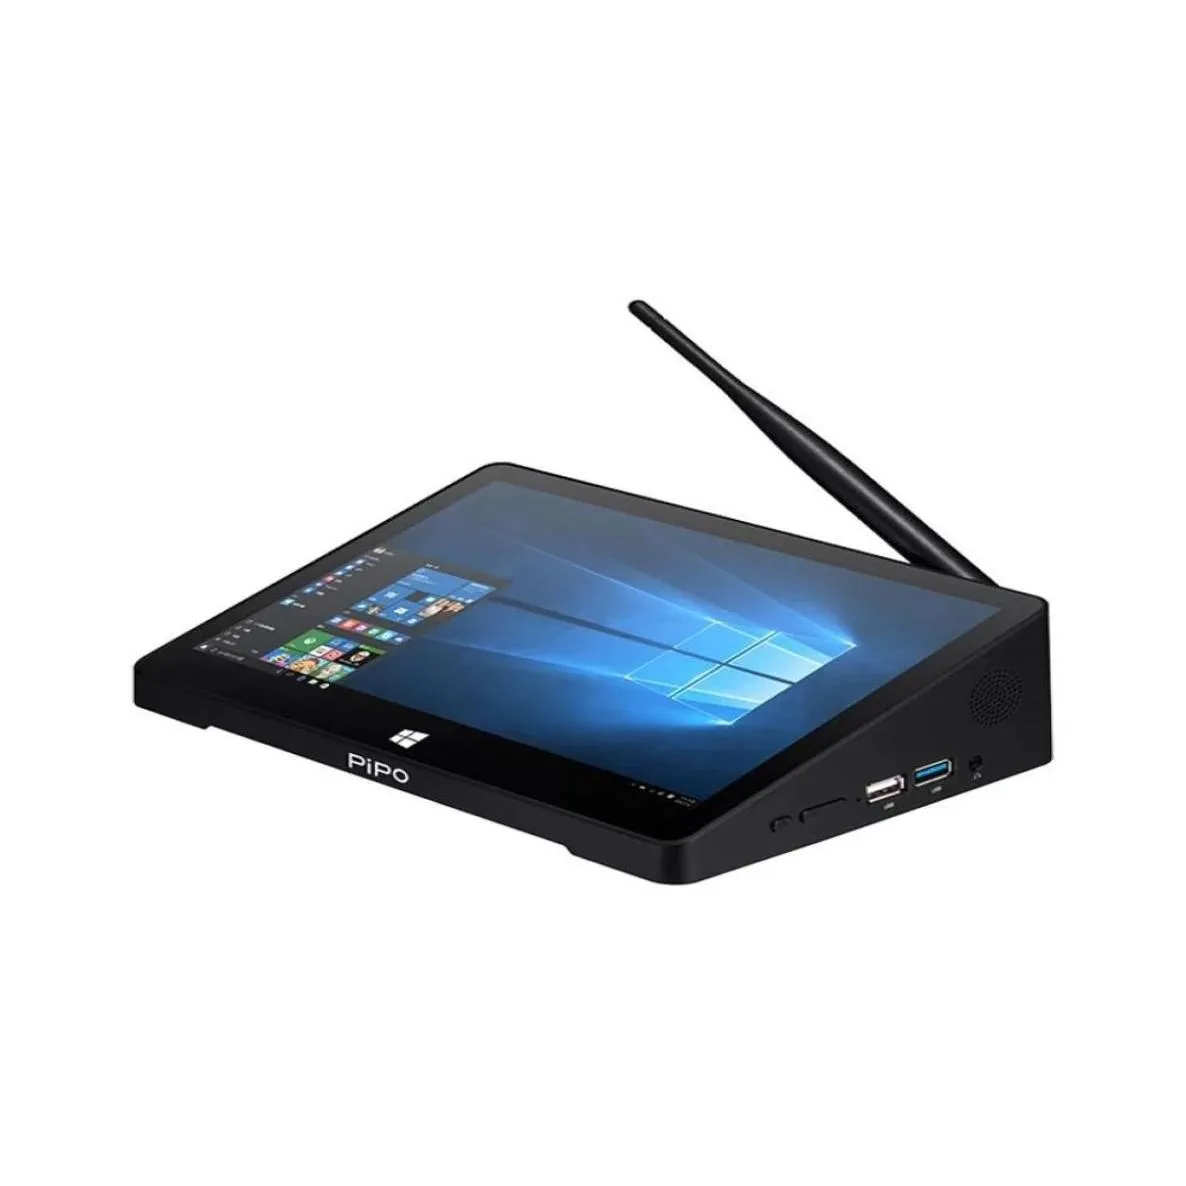 Tablet-PC 101 Zoll Pipo X10 Pro 6 GB 64 GB Windows 10 Tablets Pc5863631 Drop Delivery Computers Networking Ot1Zs